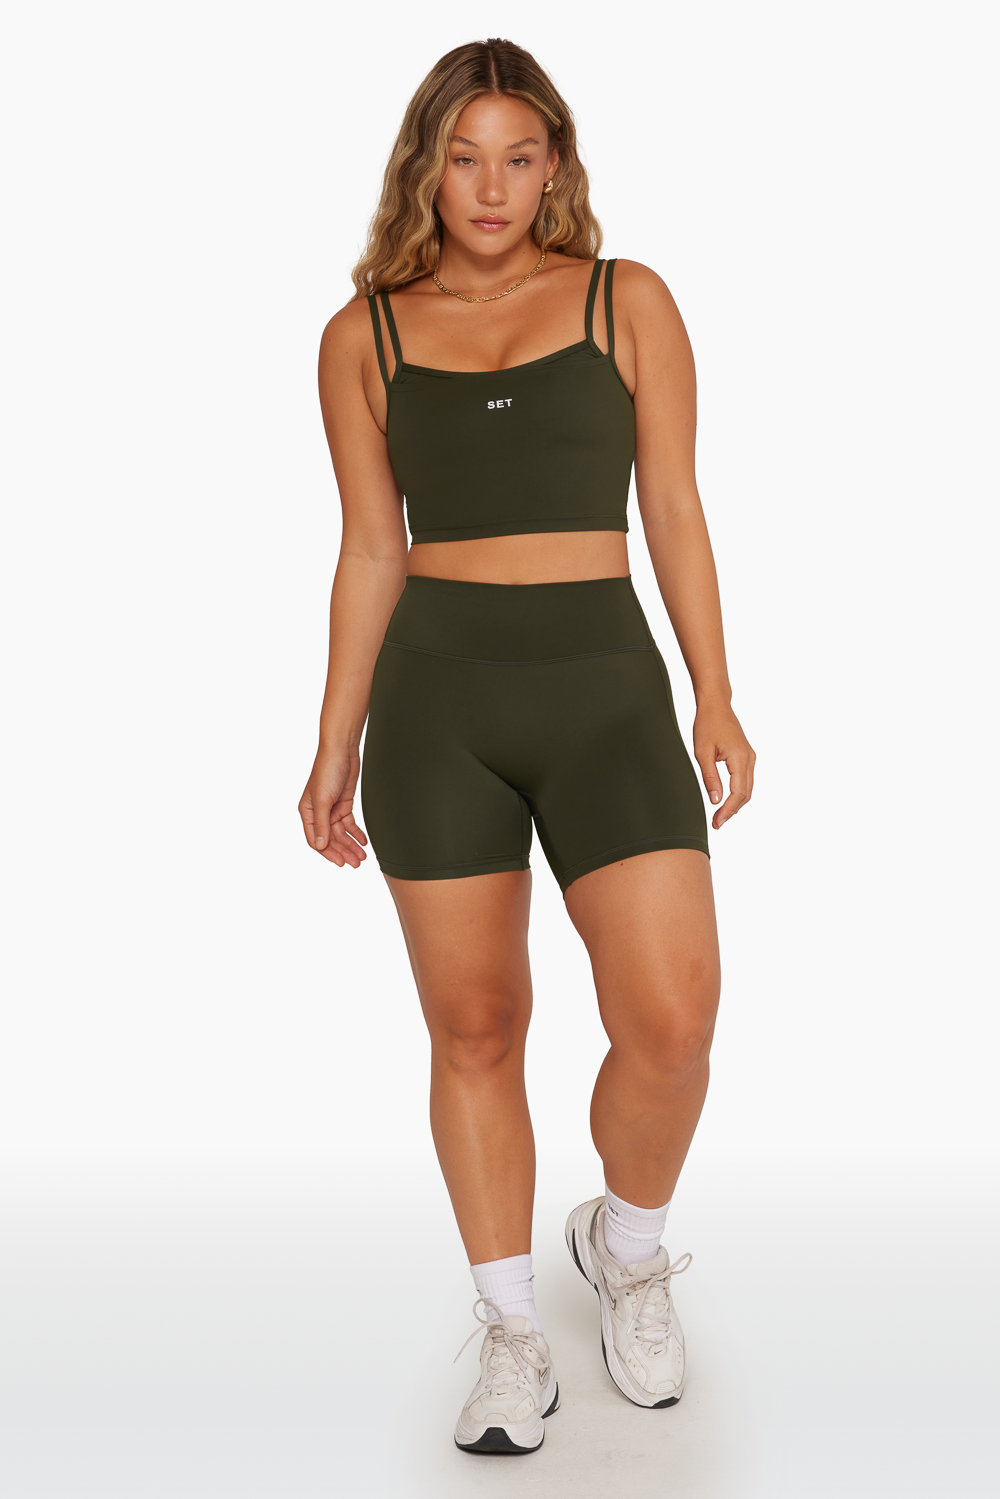 SPORTBODY® BIKE SHORTS - AFTER HOURS